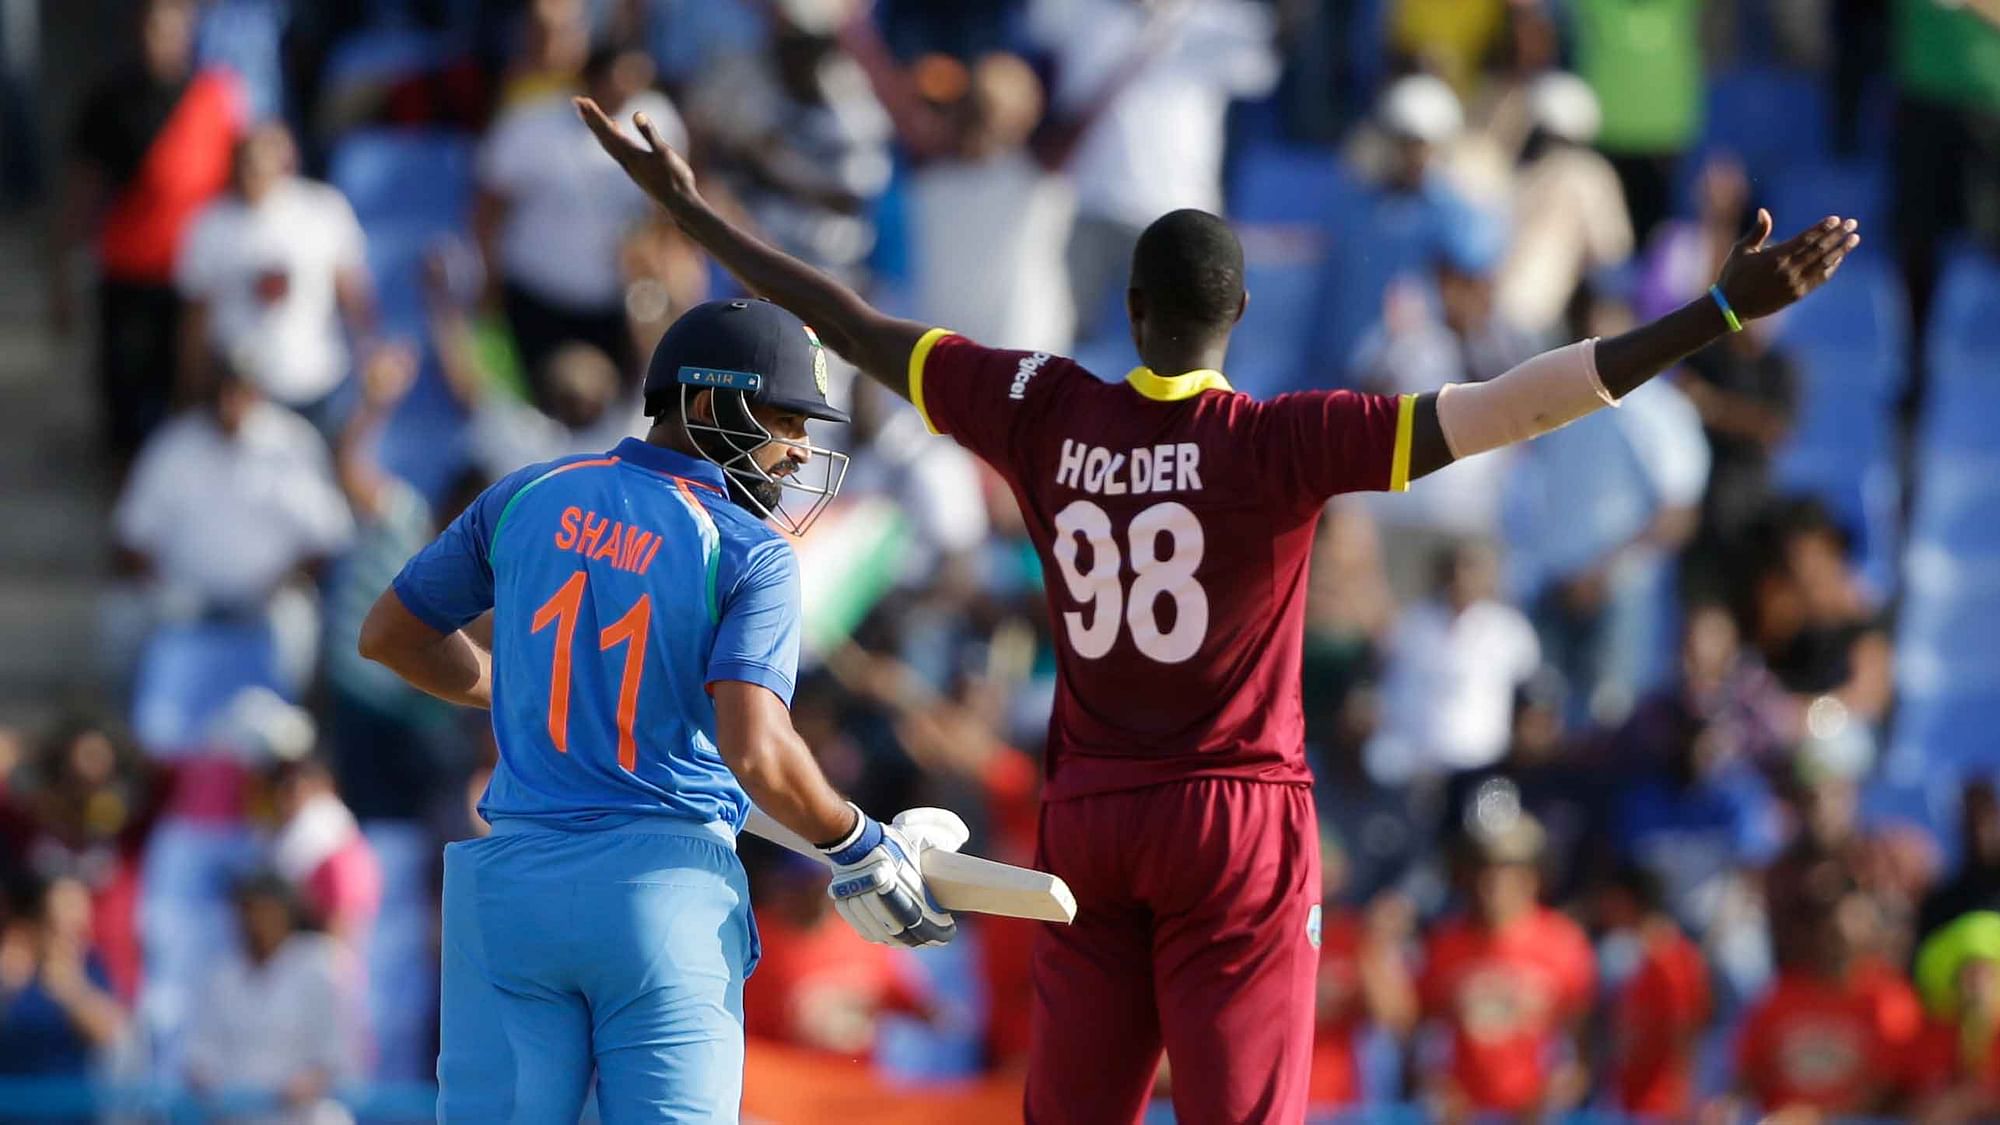 West Indies beat India by 11 runs in the fourth ODI at North Sound on Sunday.